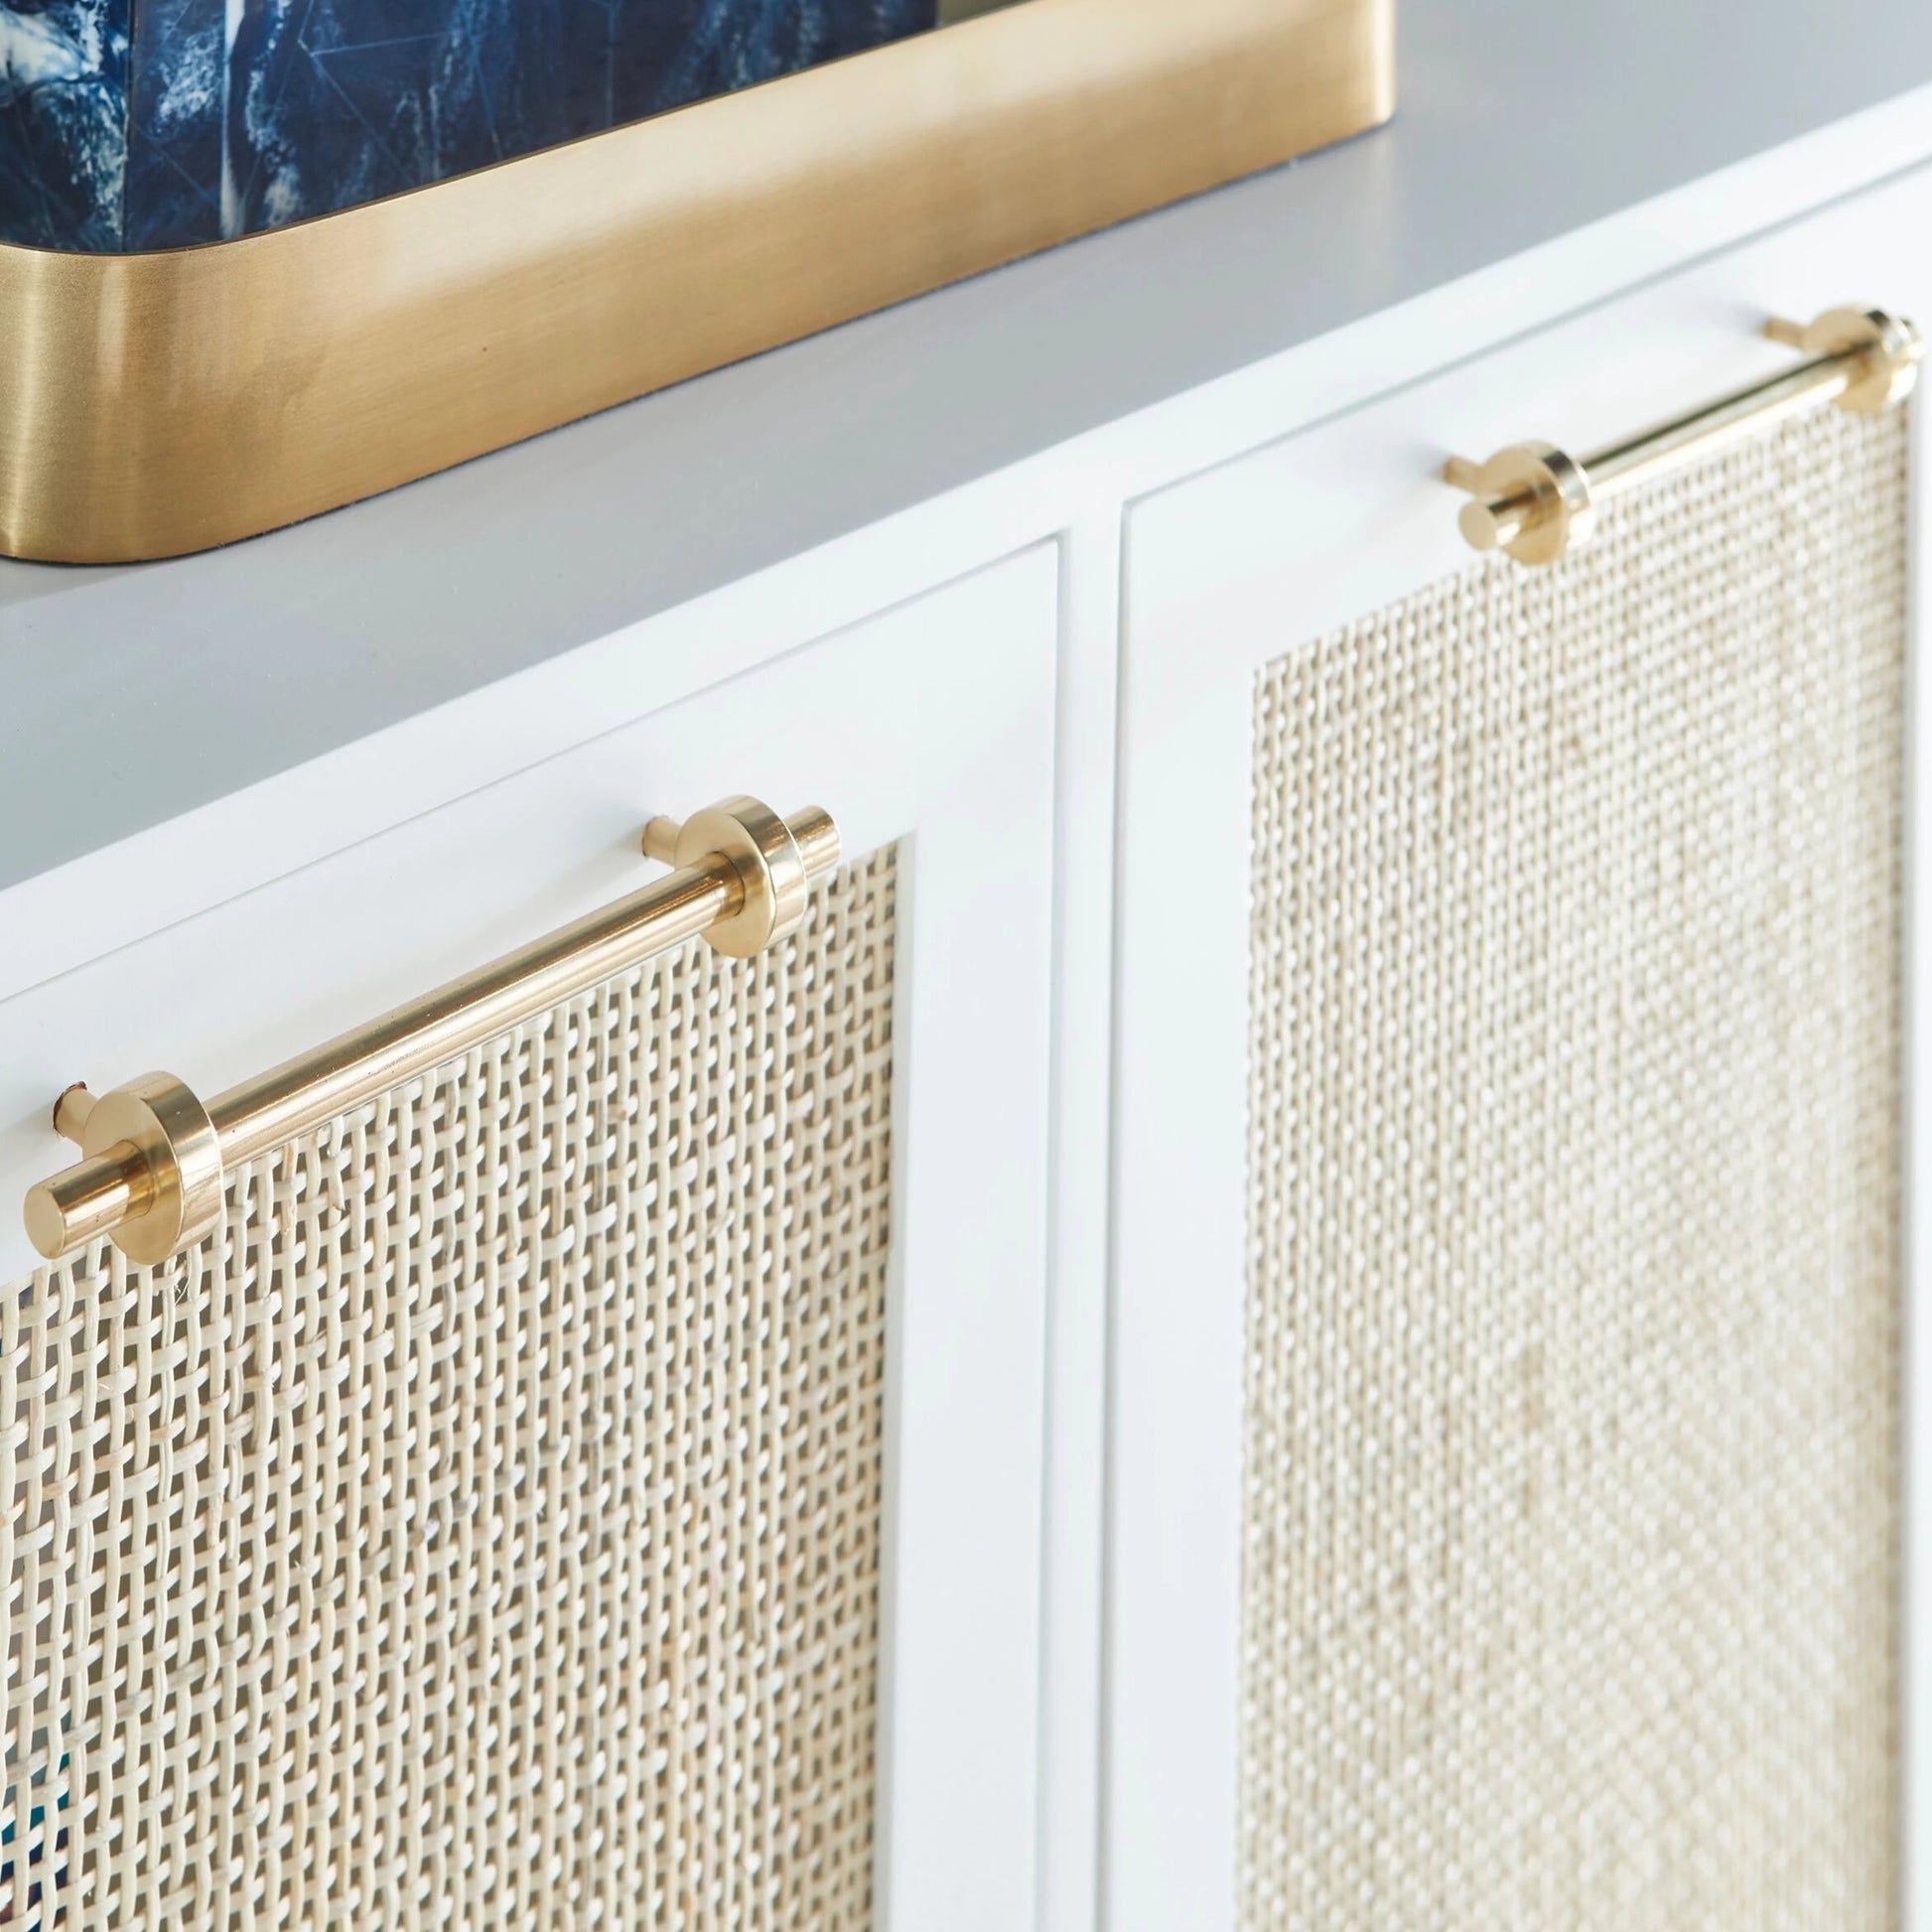 Worlds Away Marcus Cabinet with Gold Leaf Bamboo Hardware - Glossy White  Lacquer